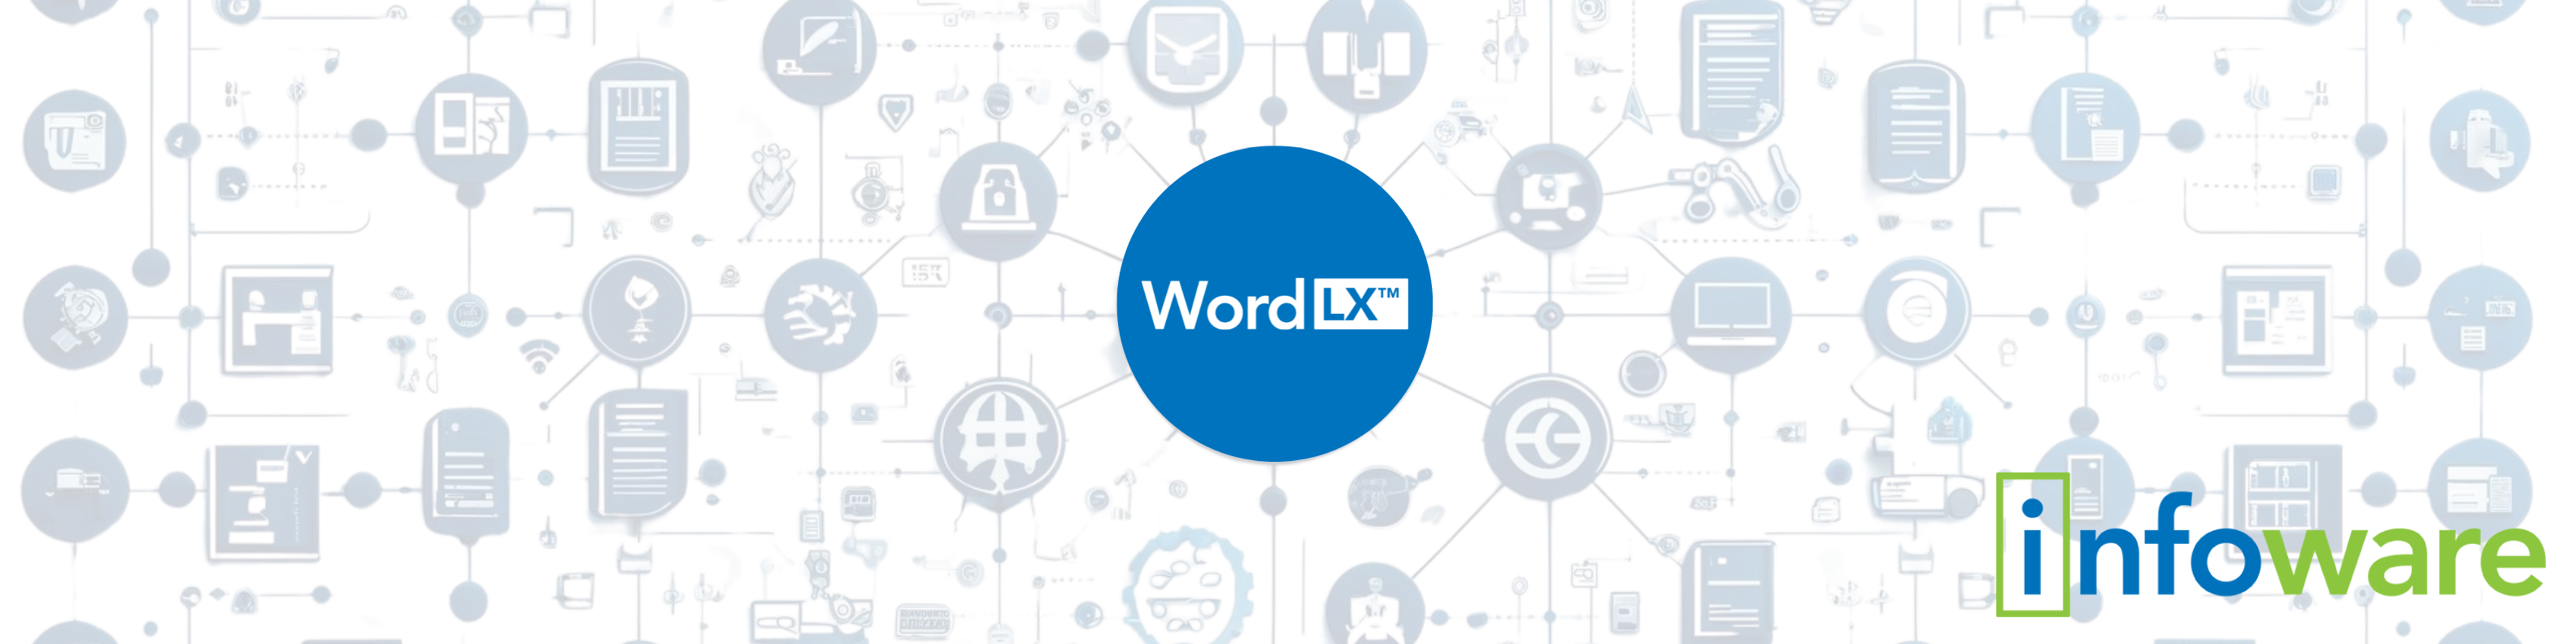 Word LX™ by Infoware Word LX™ by Infoware